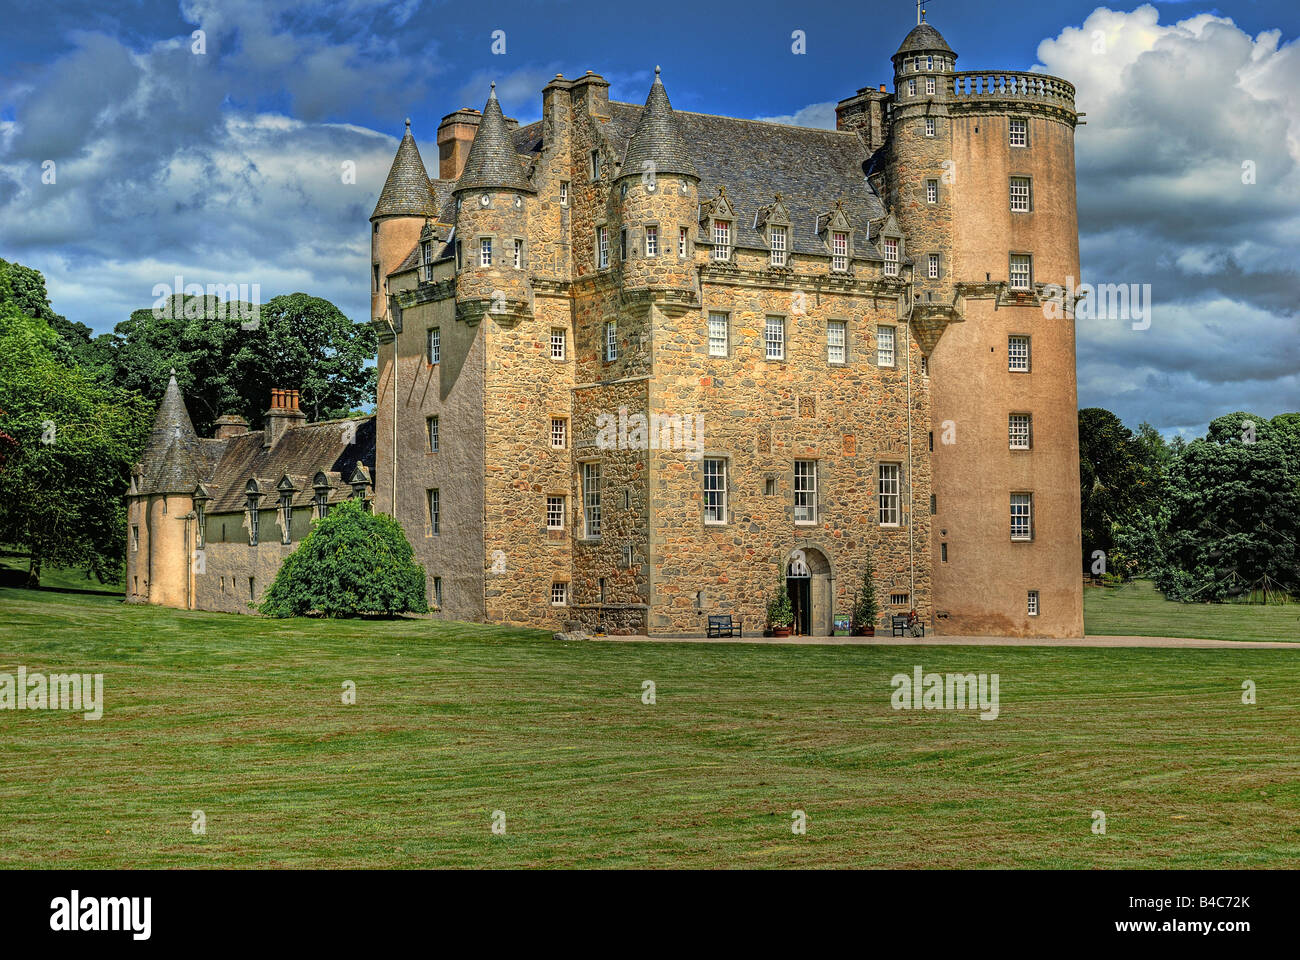 Castle Fraser. A view of Castle Fraser and grounds from the front (Main Entrance) Stock Photo